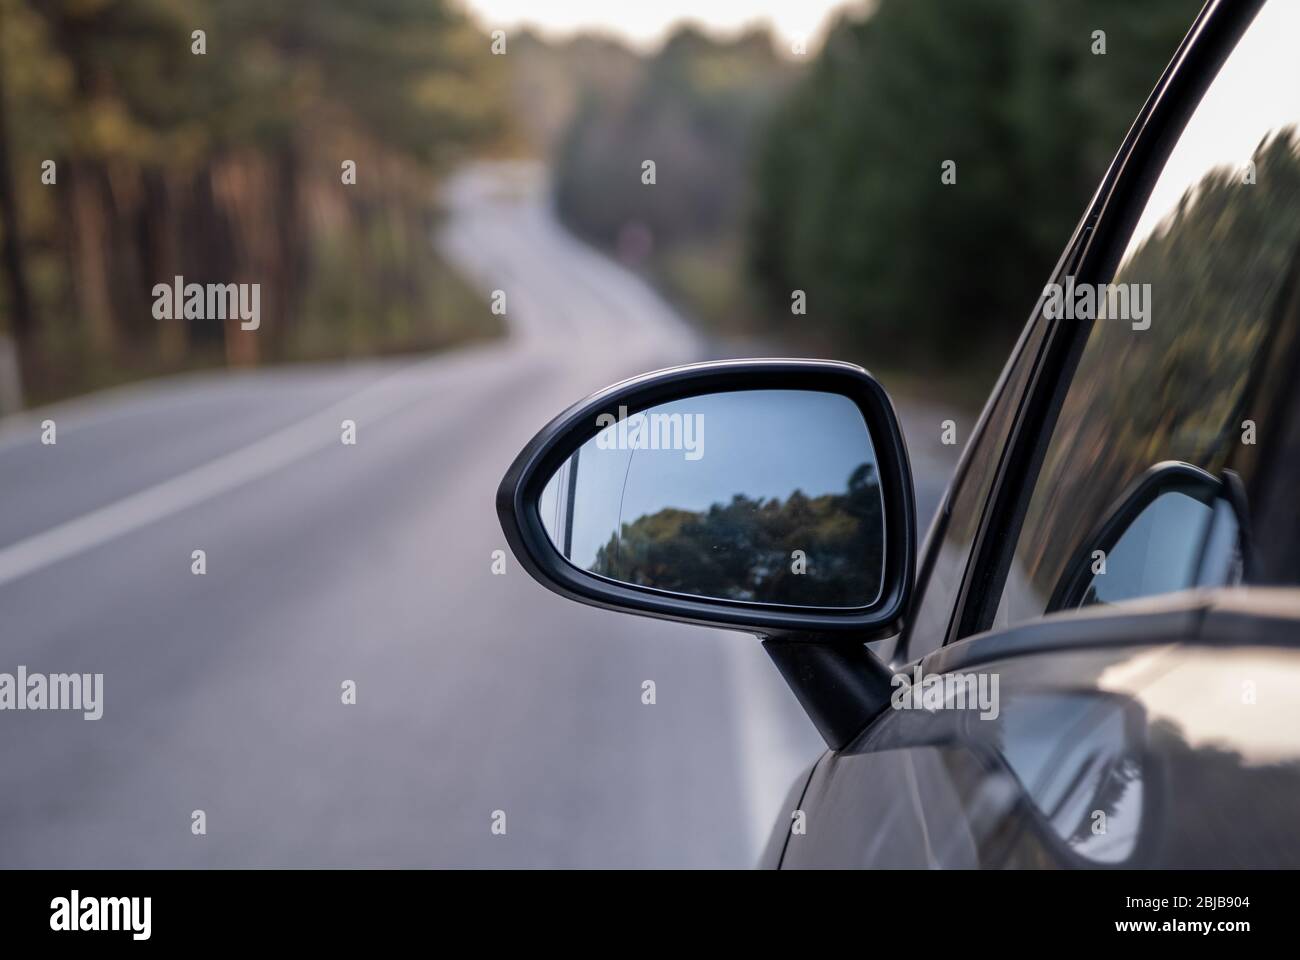 Car rear view mirror on wooded rural road Stock Photo